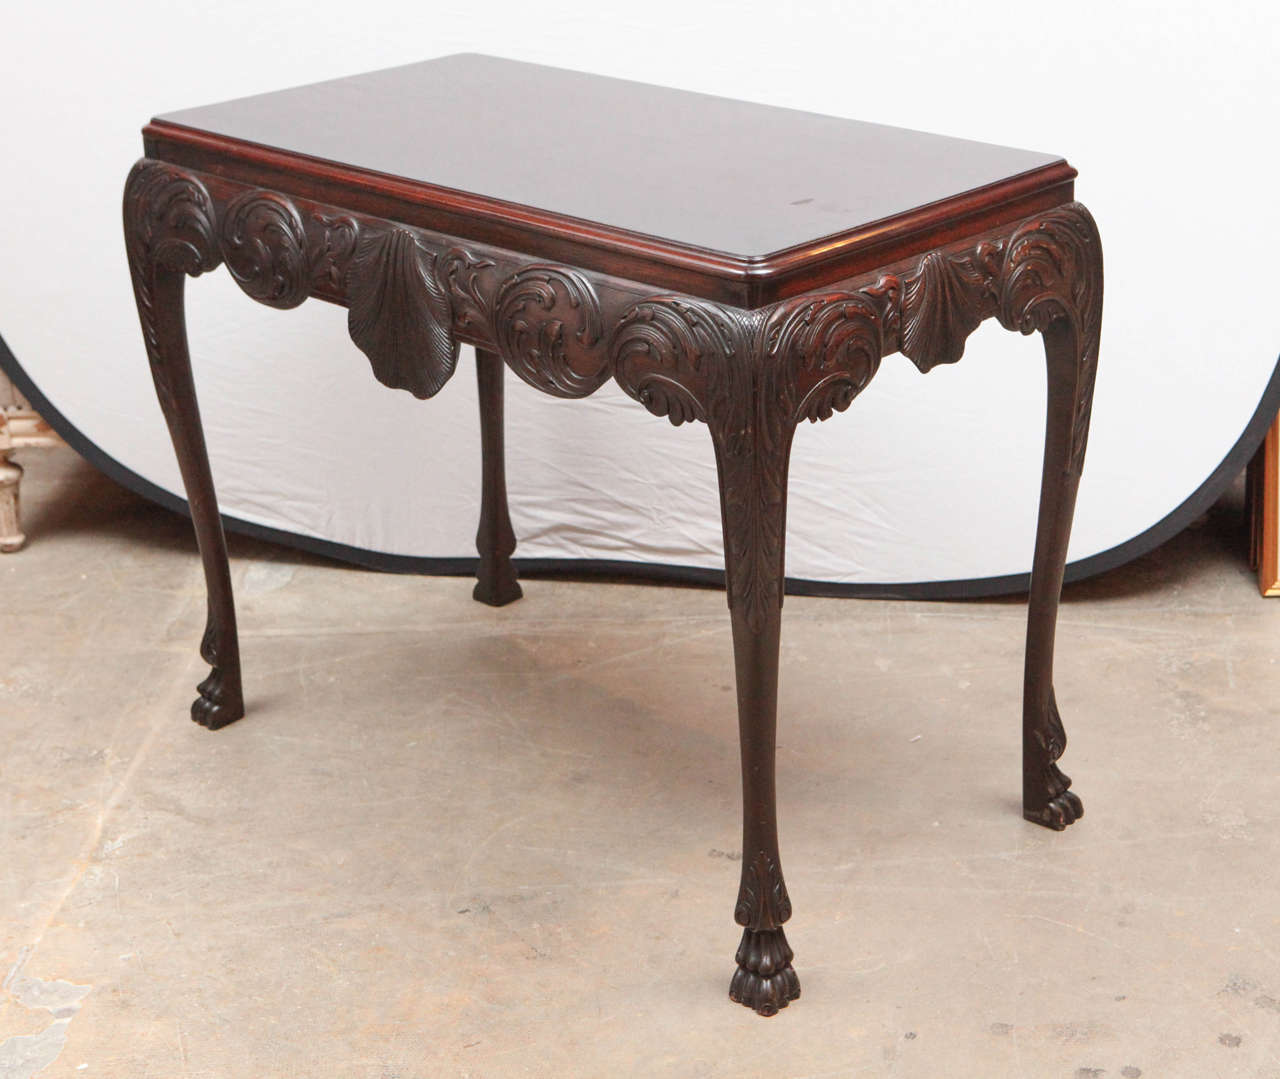 Late19th c. English Mahogany Console Table with Single Drawer and Shell Motif.  Can be used as Console, Center or Writing Table.